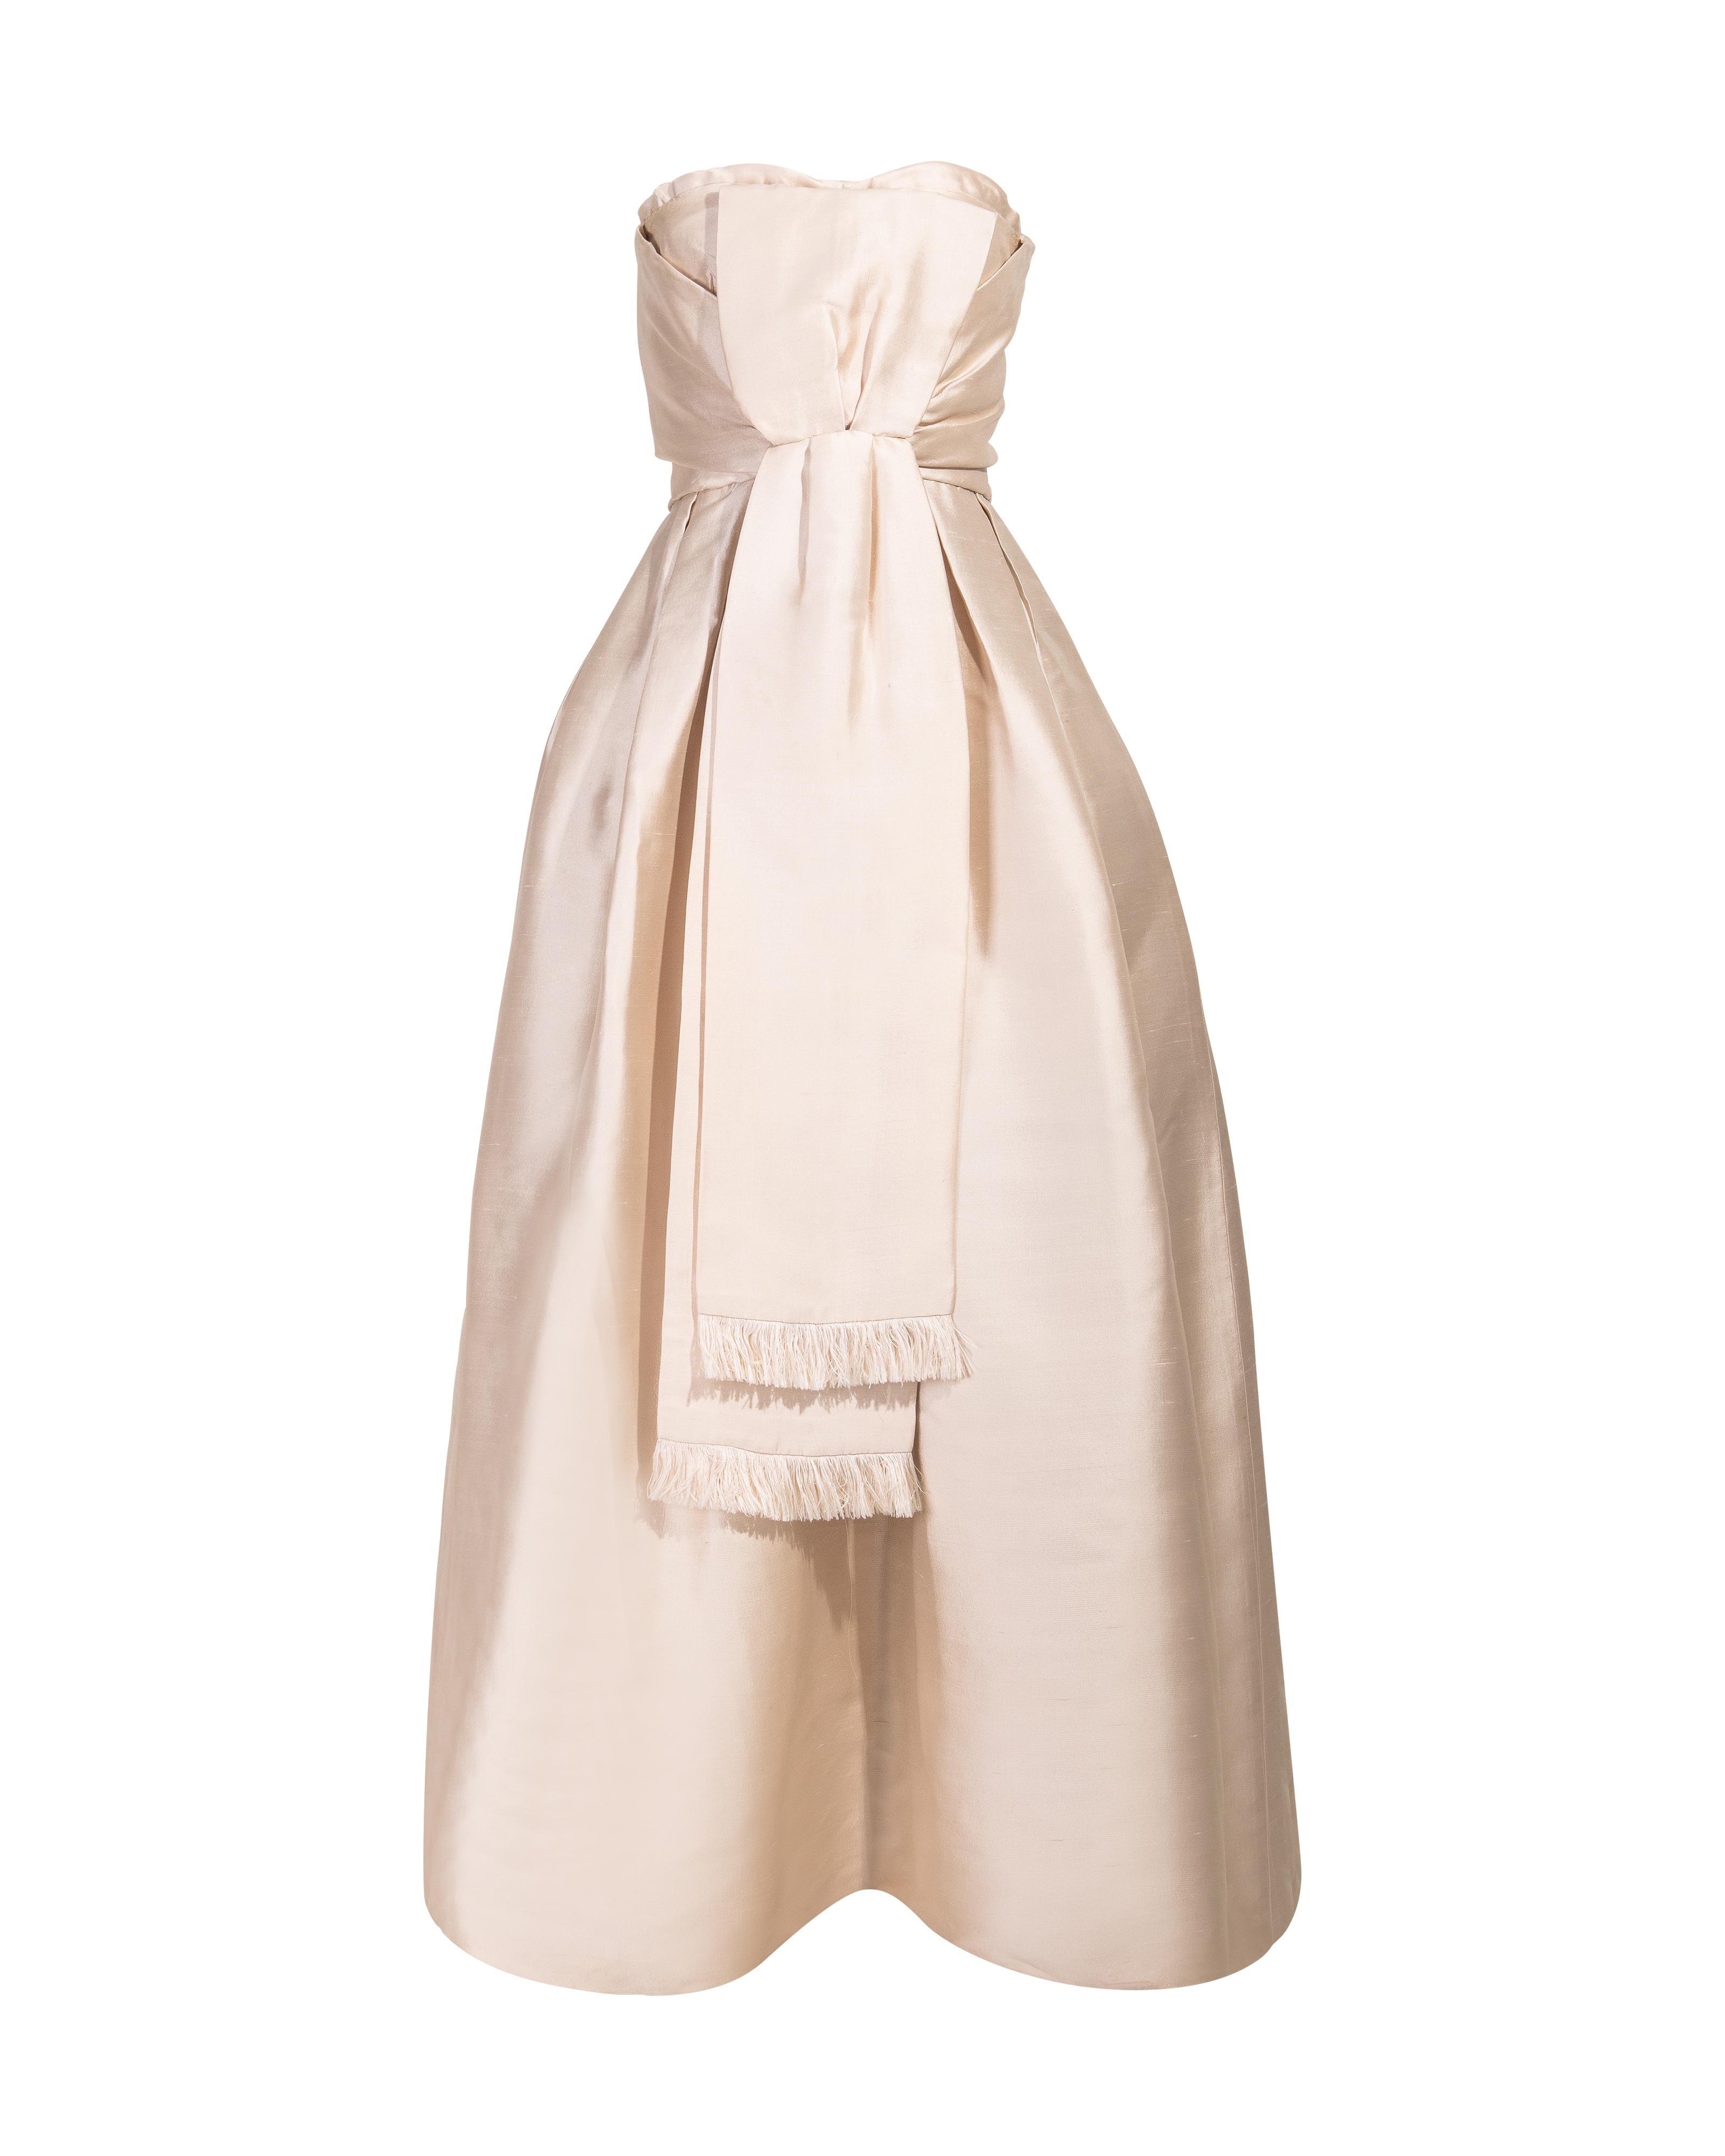 1958 Strapless Cream Gown by Marc Bohan